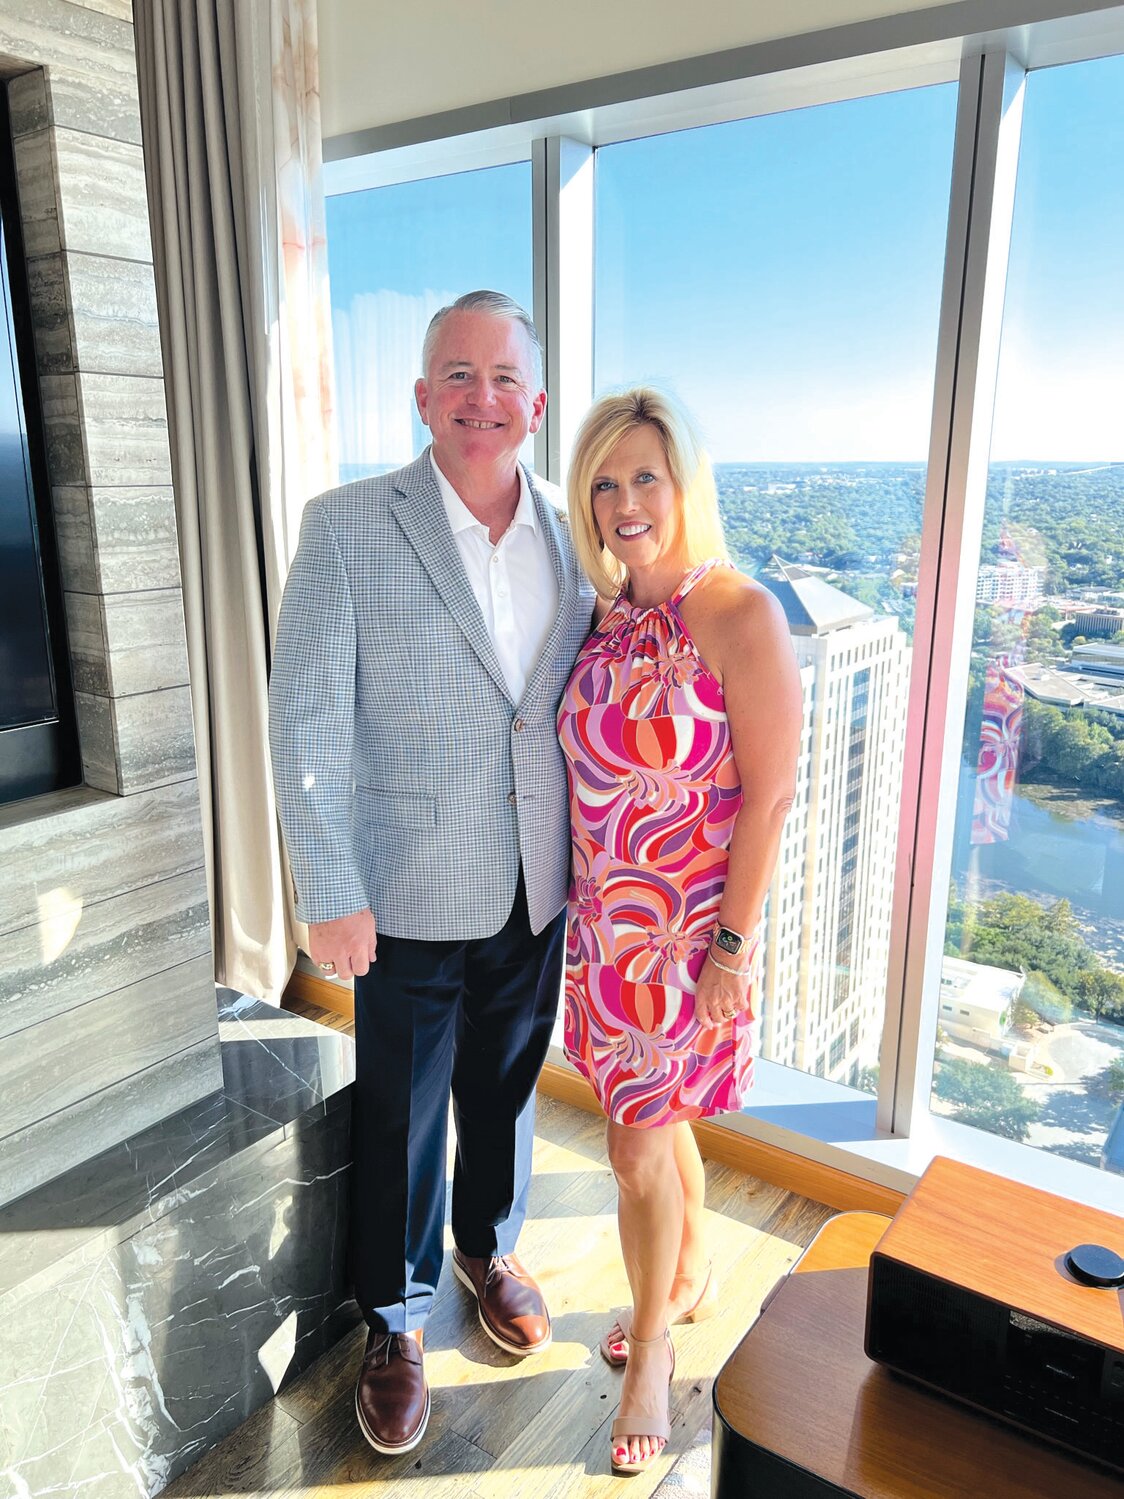 Jonesburg State Bank President and CEO Dan Robb poses with wife Dianna. Robb recently finished his 1-year term as chairman of the American Bankers Association.